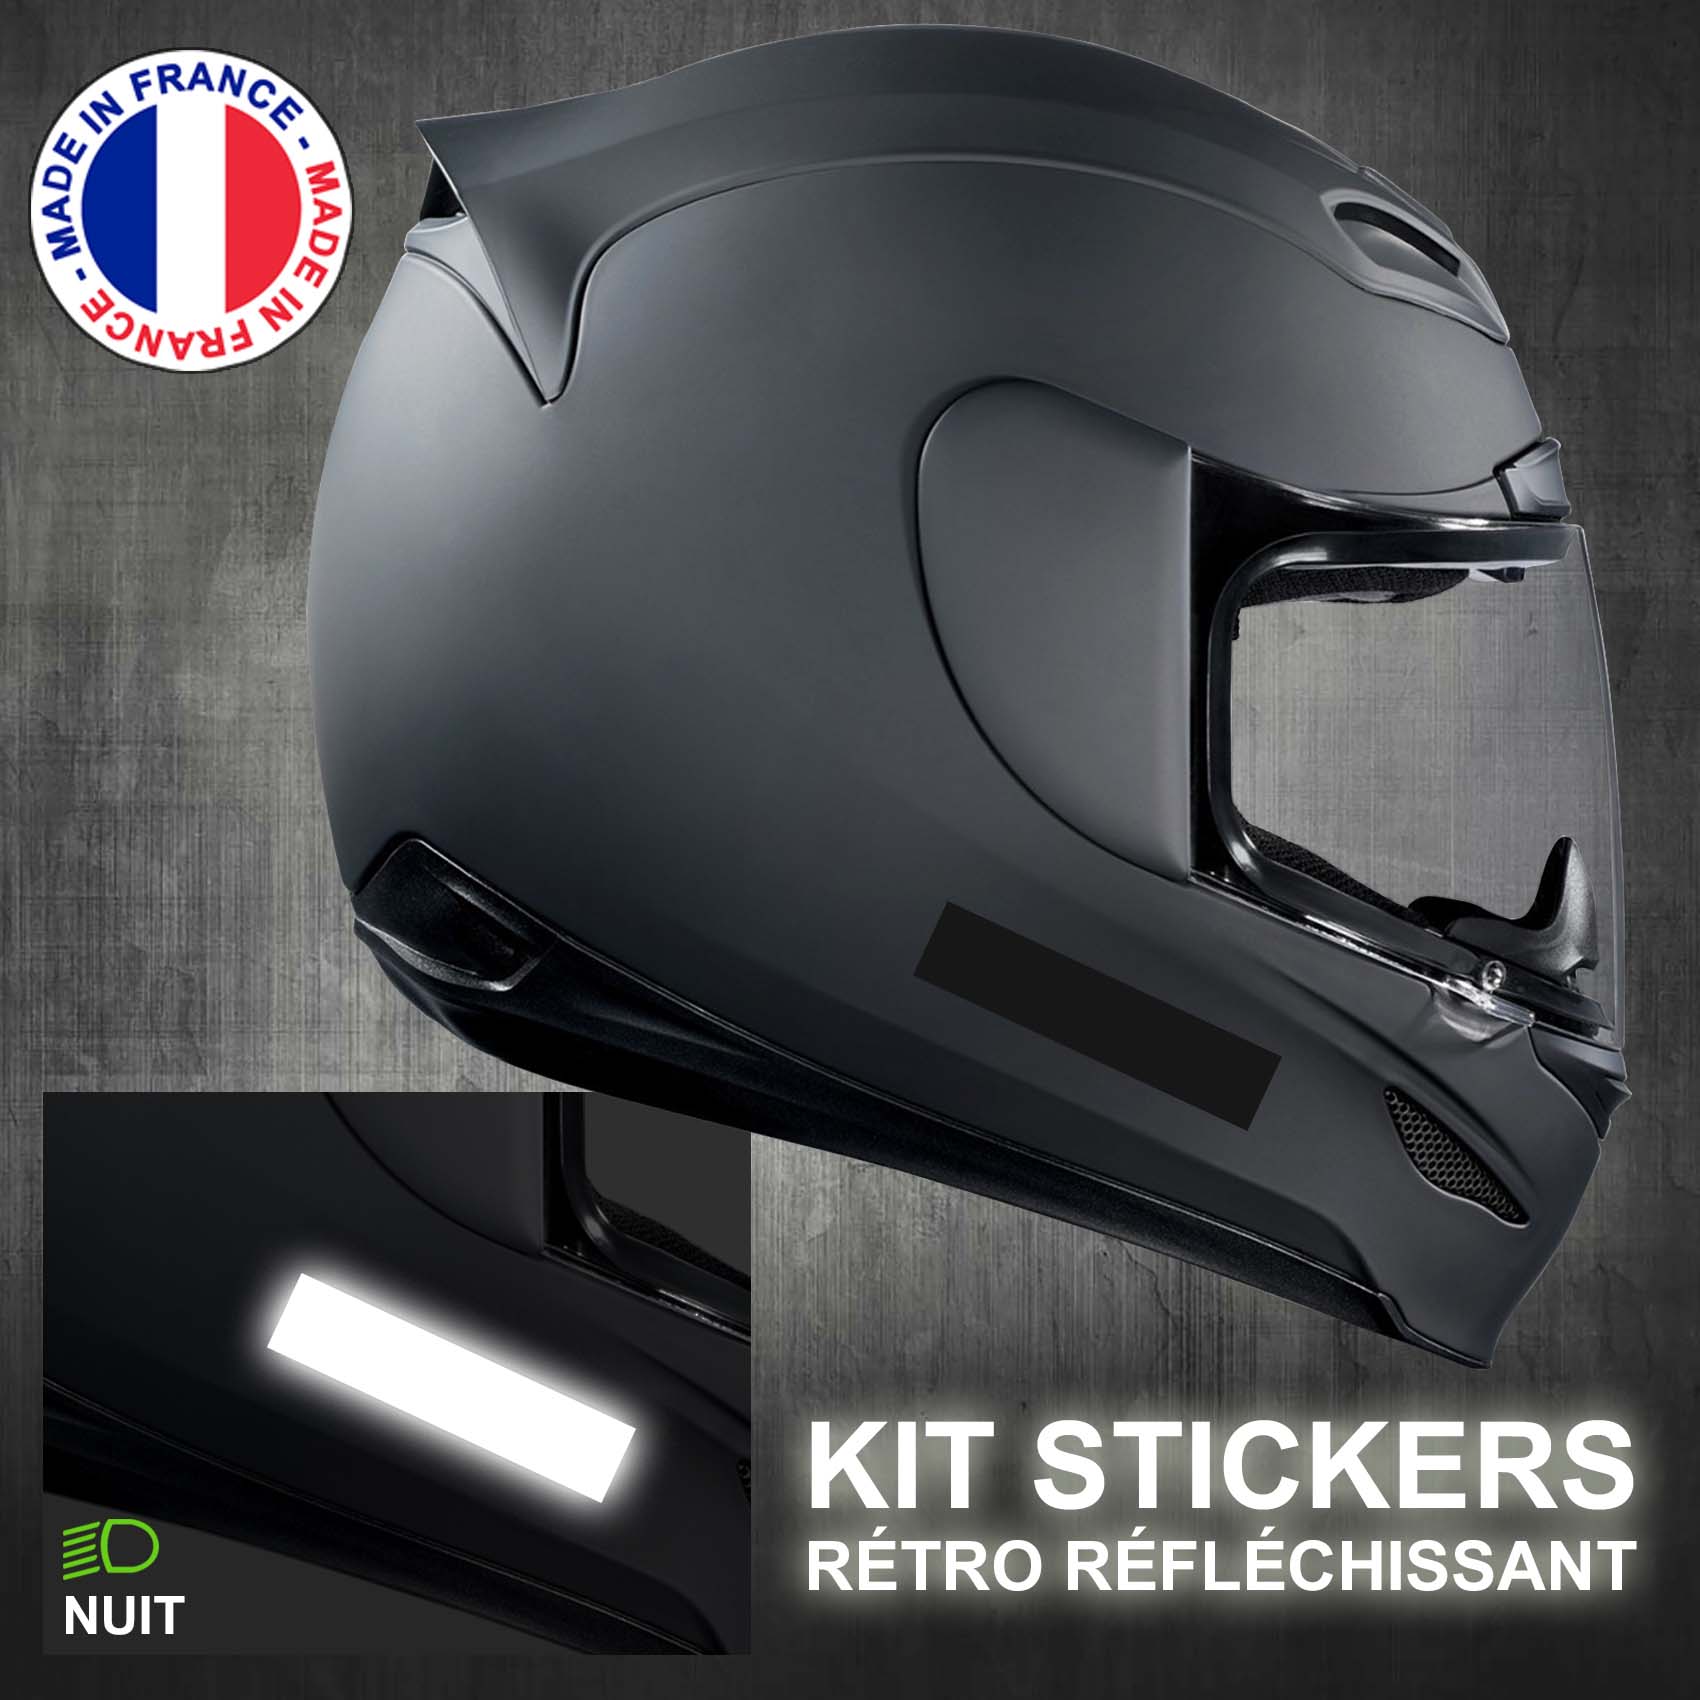 stickers-reflechissant-noir-ovale-ref2-casque-moto-retro-reflechissant-autocollant-moto-velo-tuning-racing-route-sticker-casques-adhesif-scooter-nuit-securite-decals-personnalise-personnalisable-min